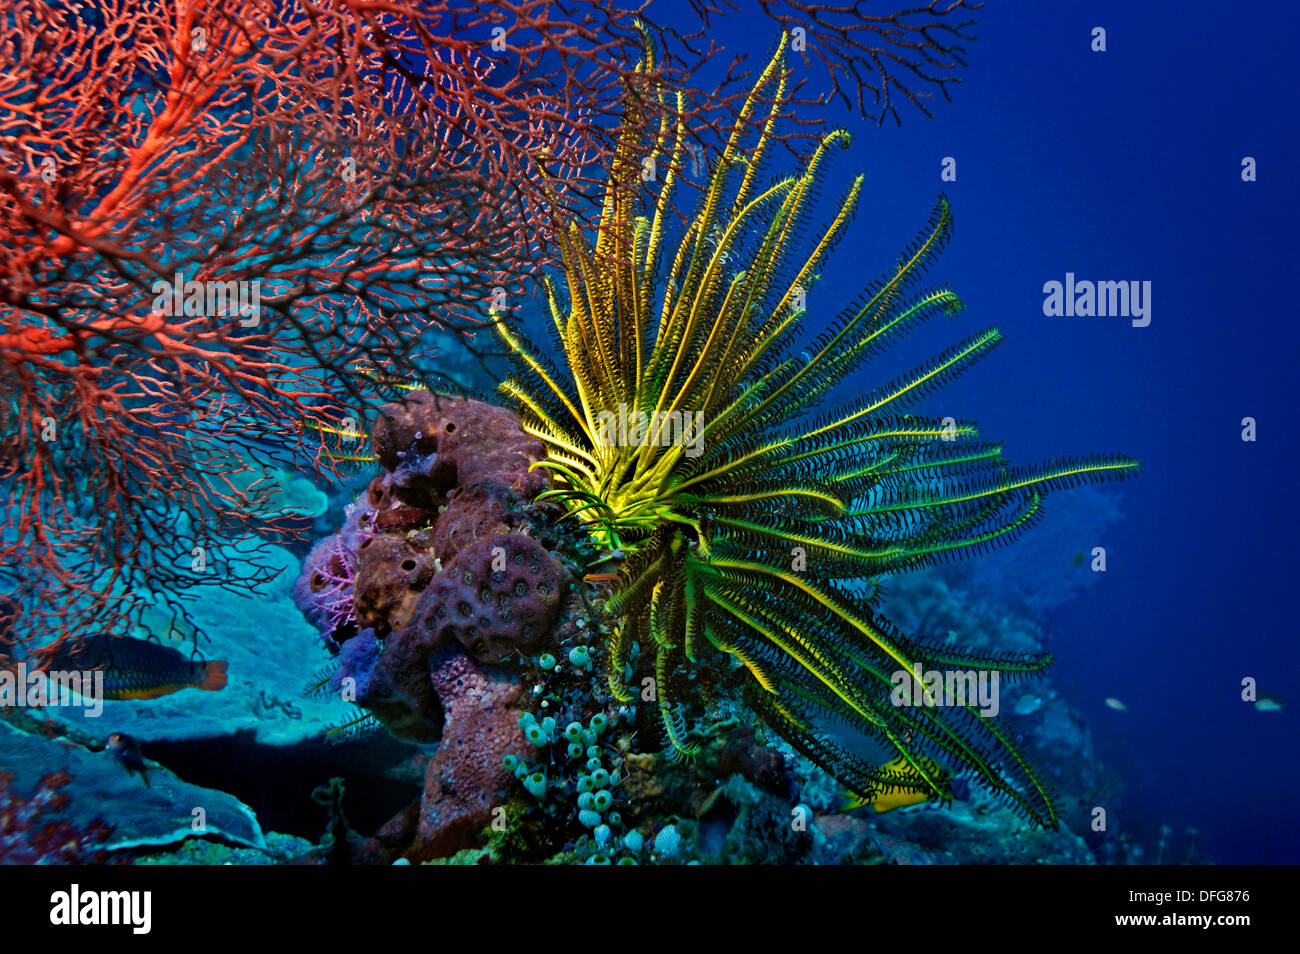 Meer Lily oder Feather Star (Crinoidea), Raja Ampat, West Papua, Indonesien Stockfoto